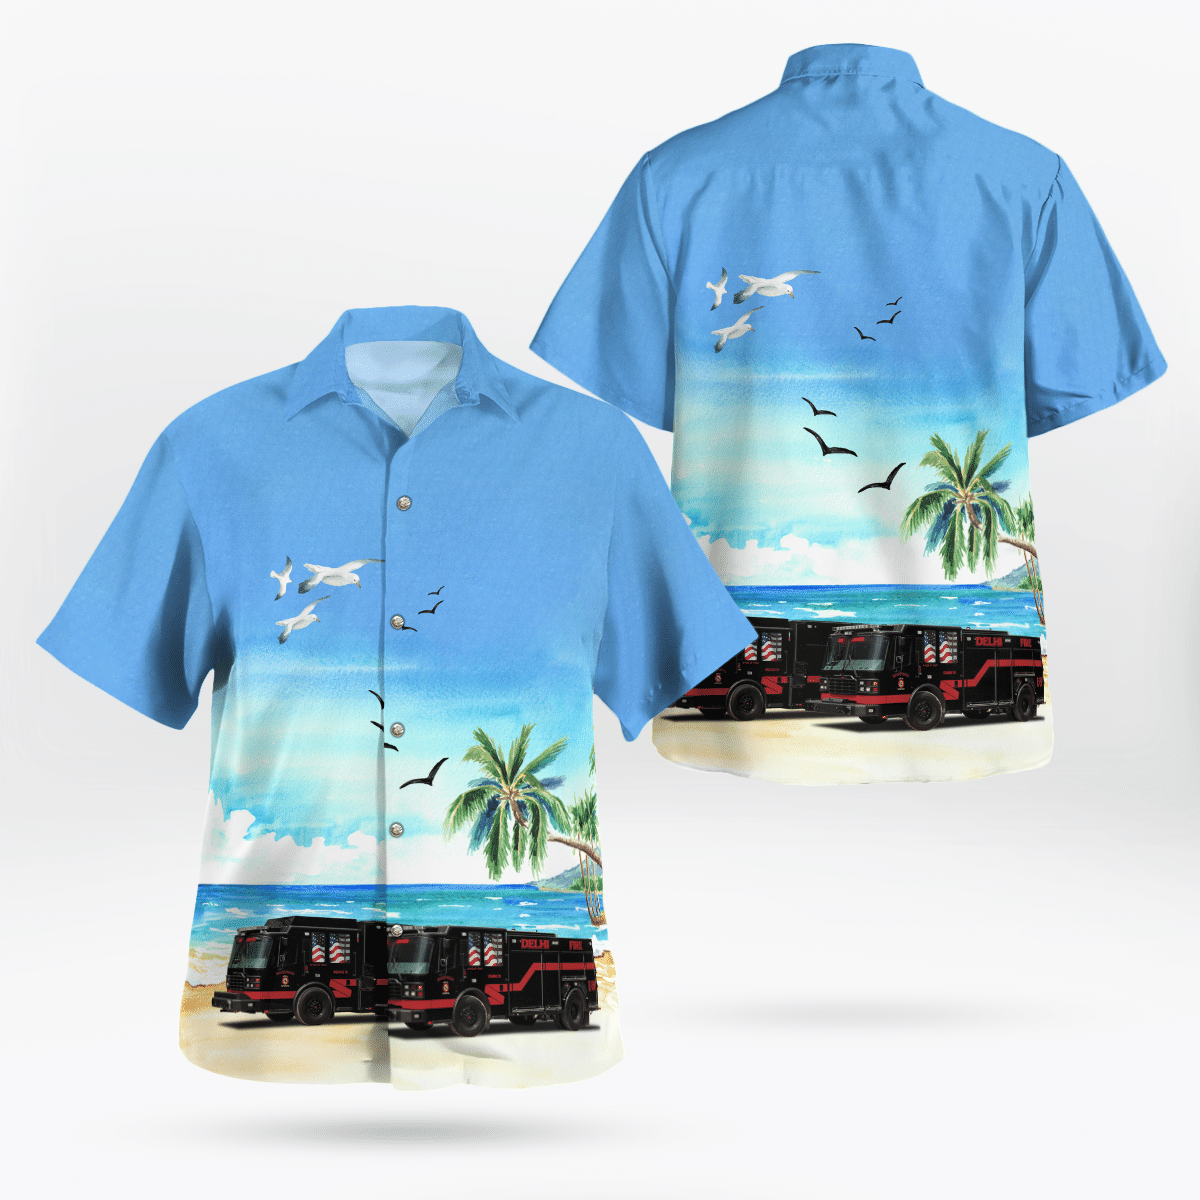 Some cool 3d hawaii shirt for this summer 100